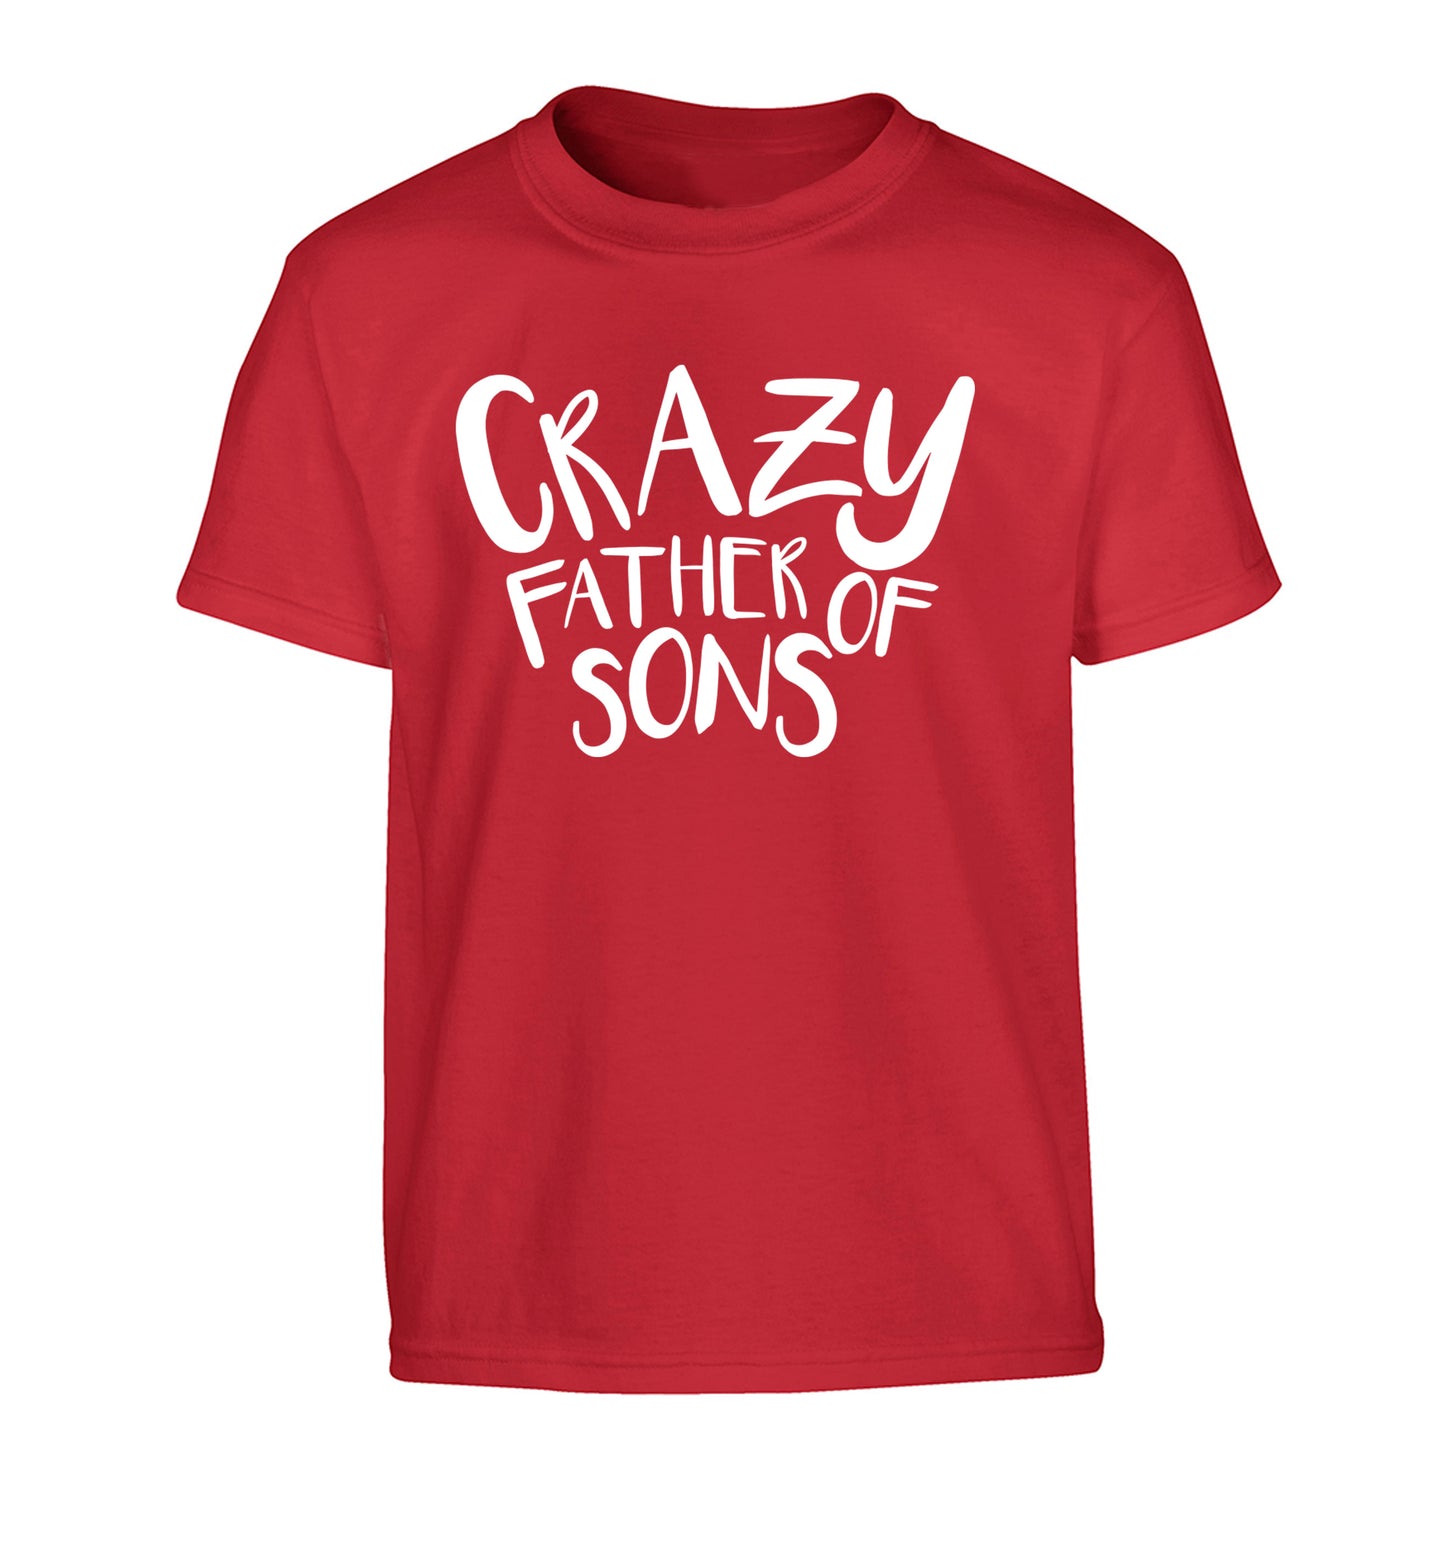 Crazy father of sons Children's red Tshirt 12-13 Years